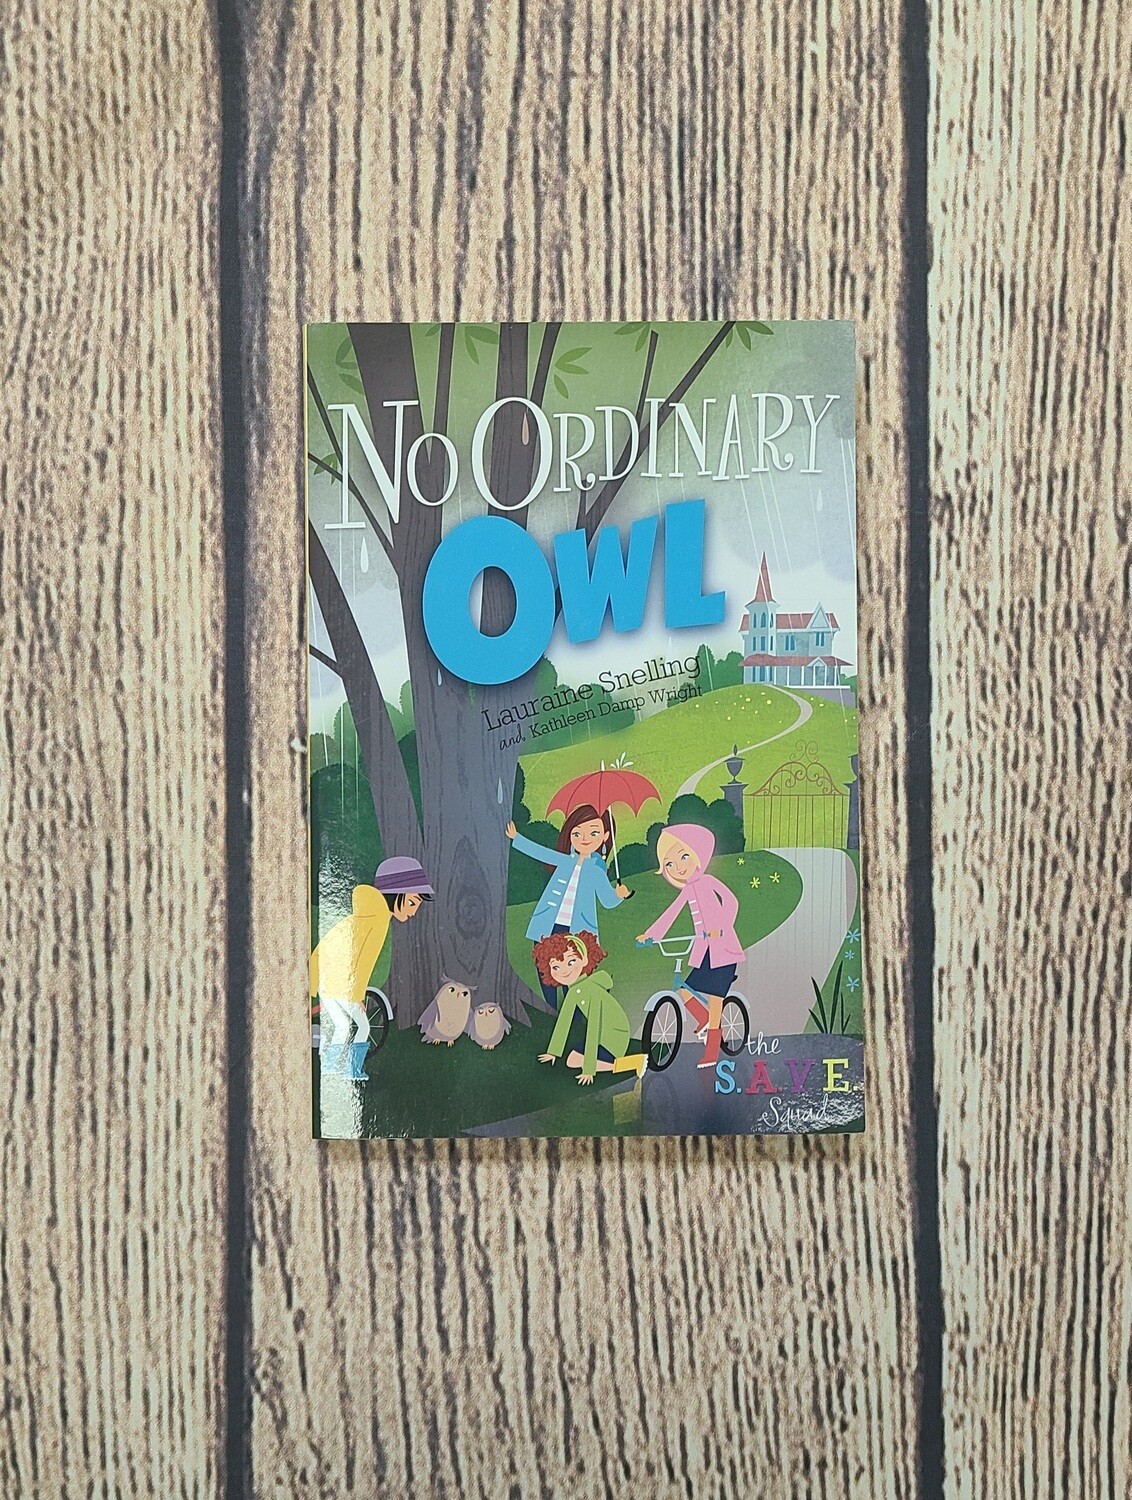 The S.A.V.E. Squad: No Ordinary Owl by Lauraine Snelling and Kathleen Damp Wright